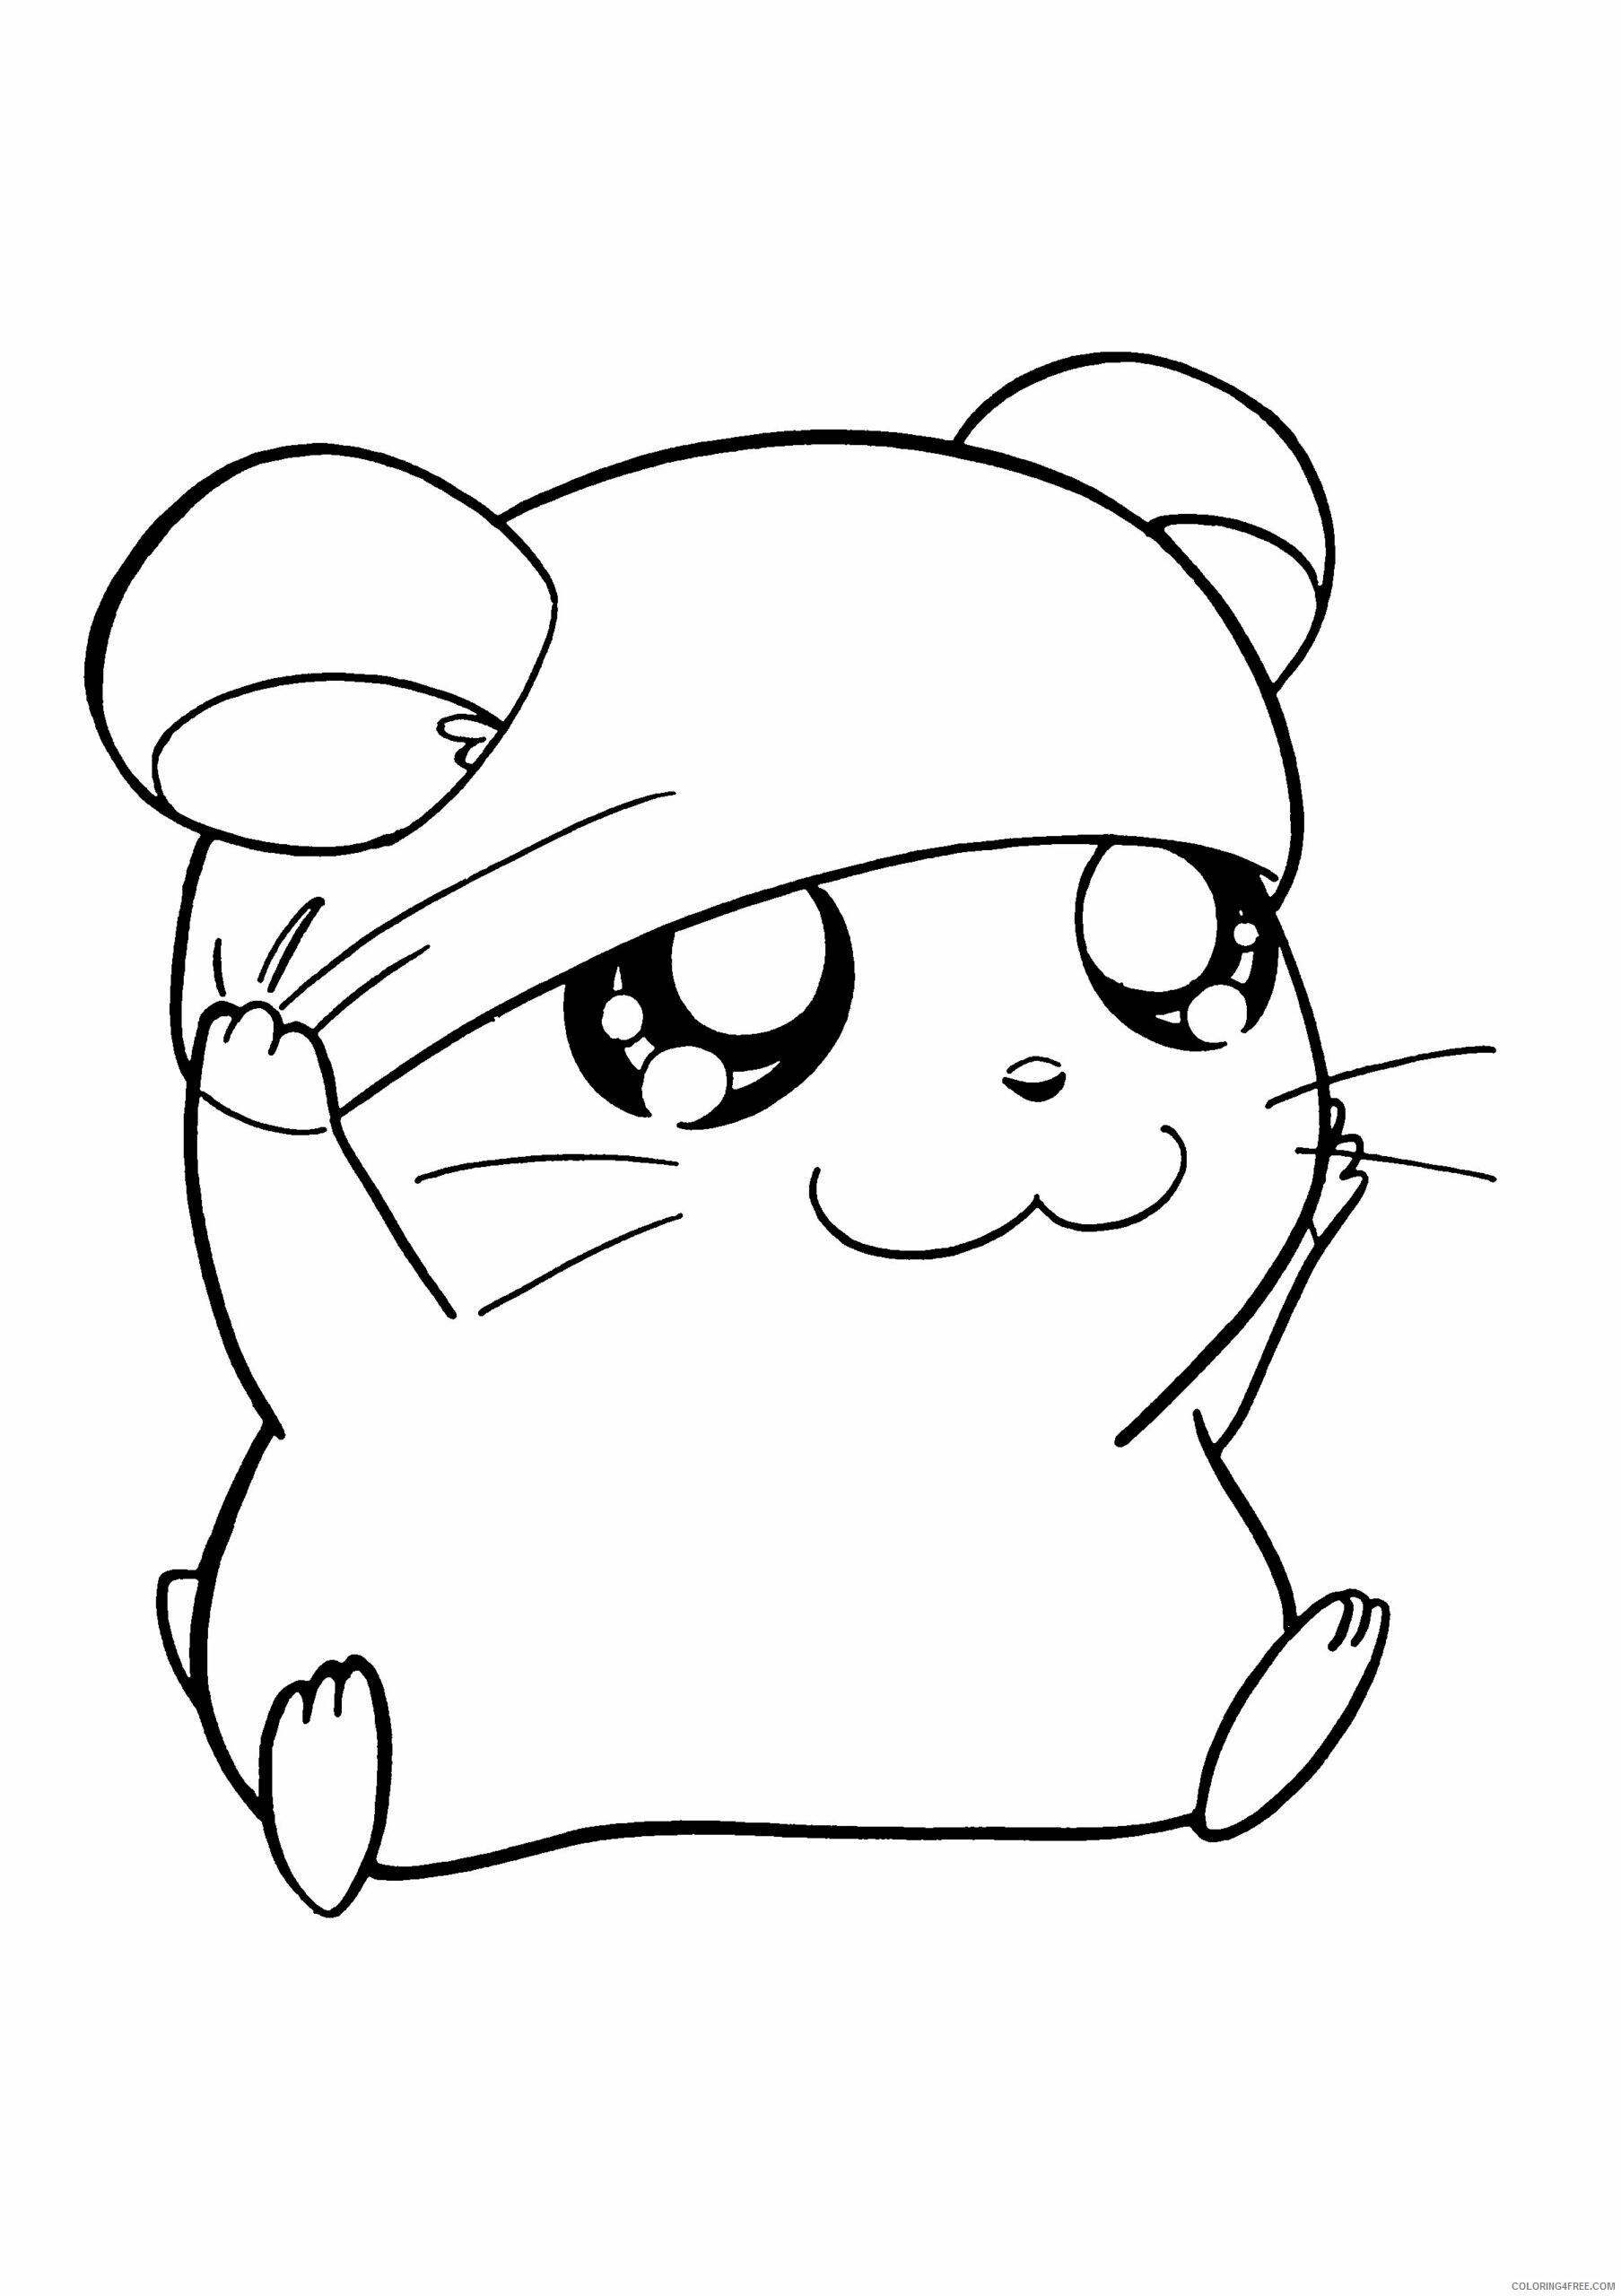 Hamster Coloring Pages Animal Printable Sheets Cute Hamster 2021 2562 Coloring4free